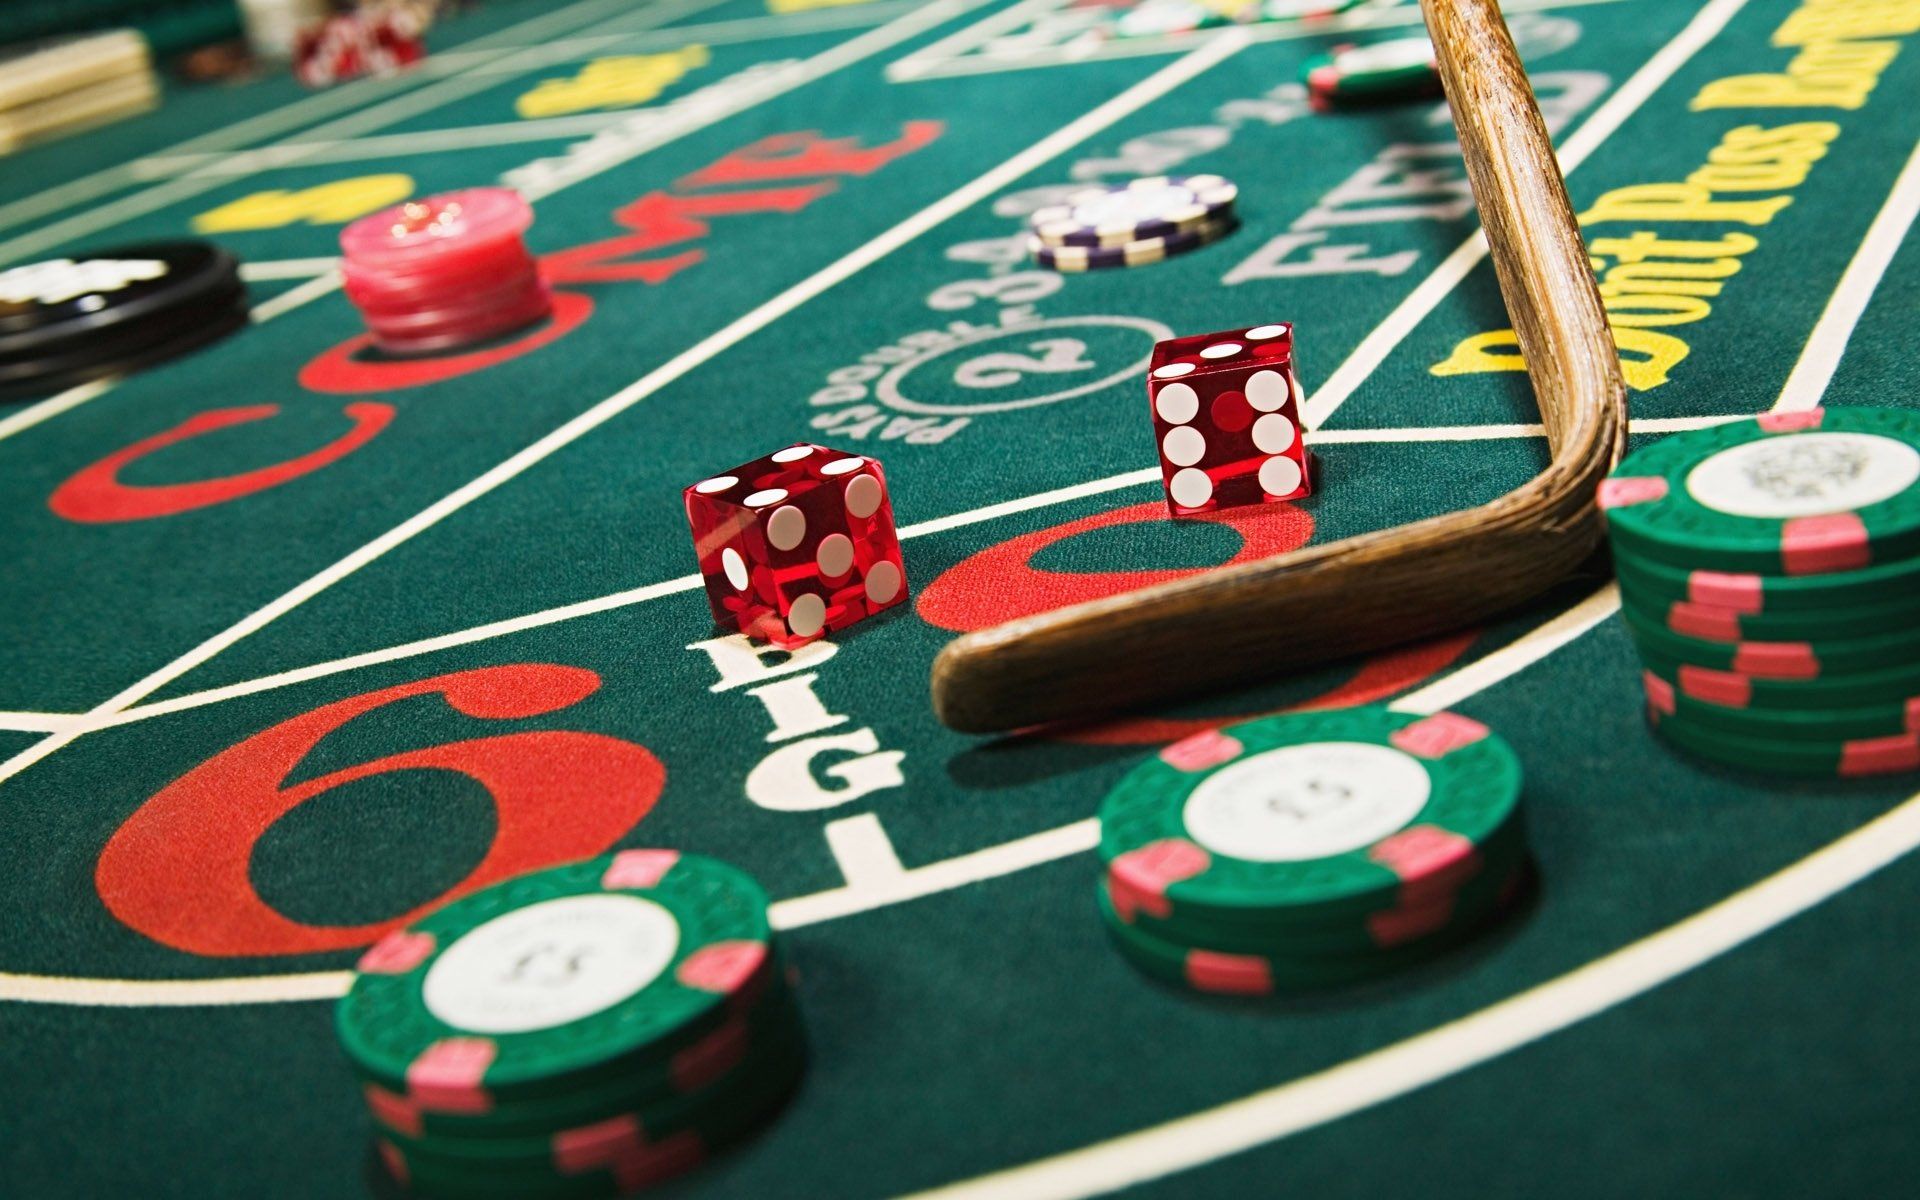 Why should you play Casino online?